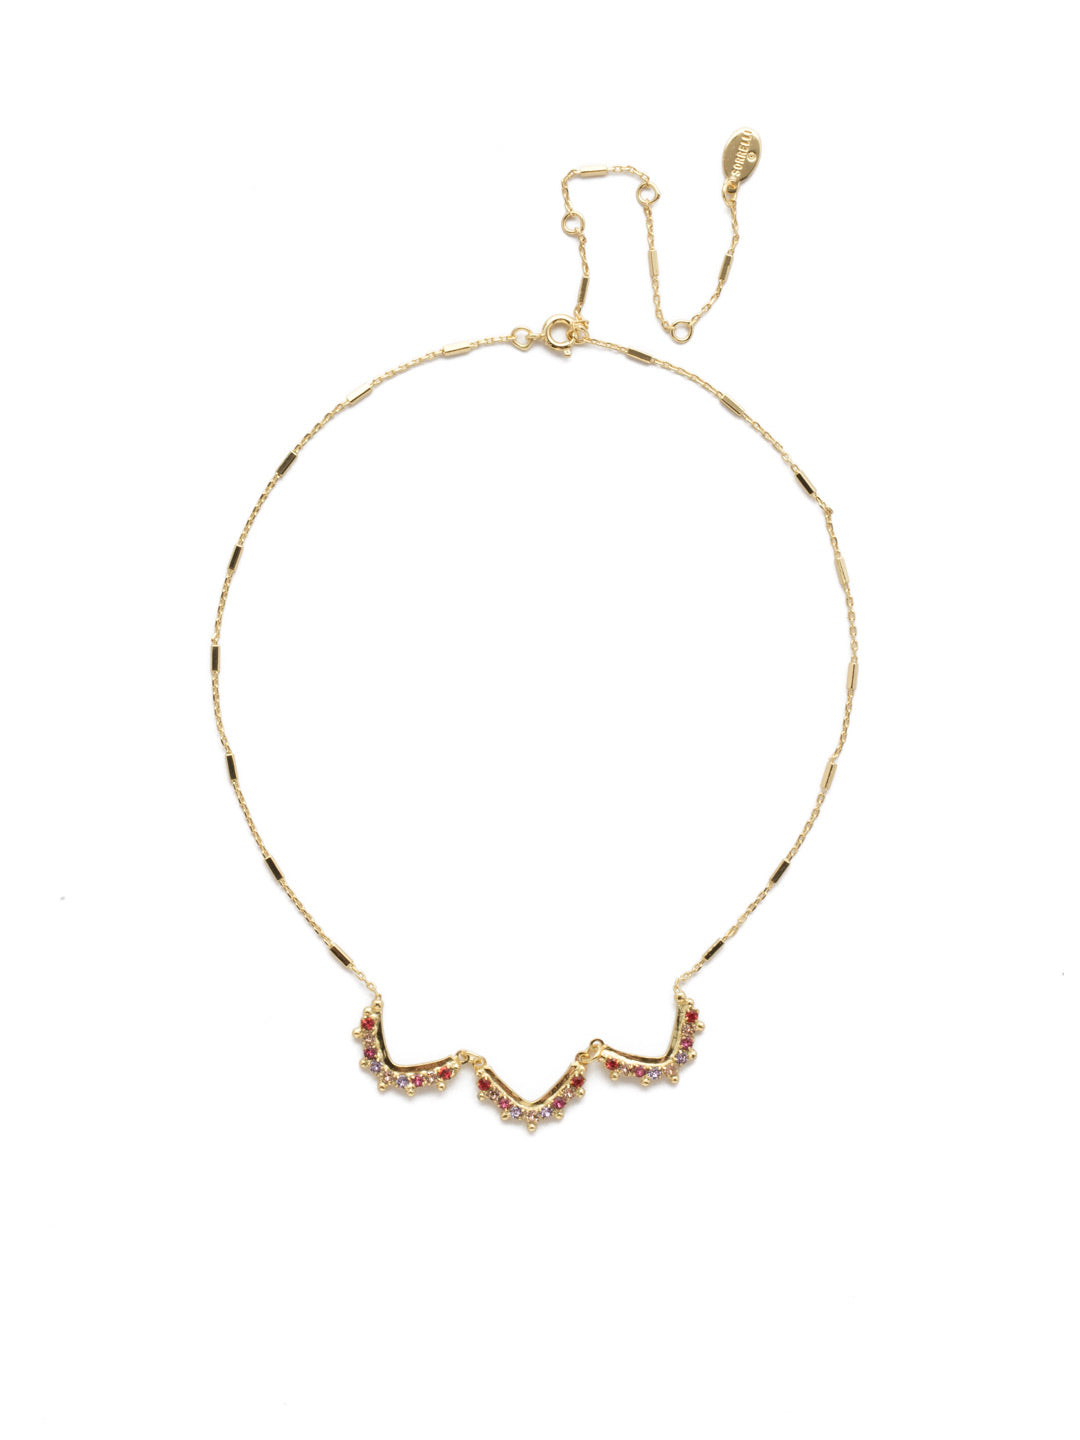 Antoinette Pendant Necklace - NEK12BGISS - <p>Fasten on this delicate filigree strand with a unique pendant necklace layered in sparkling crystals when you're looking to make a statement. From Sorrelli's Island Sun collection in our Bright Gold-tone finish.</p>